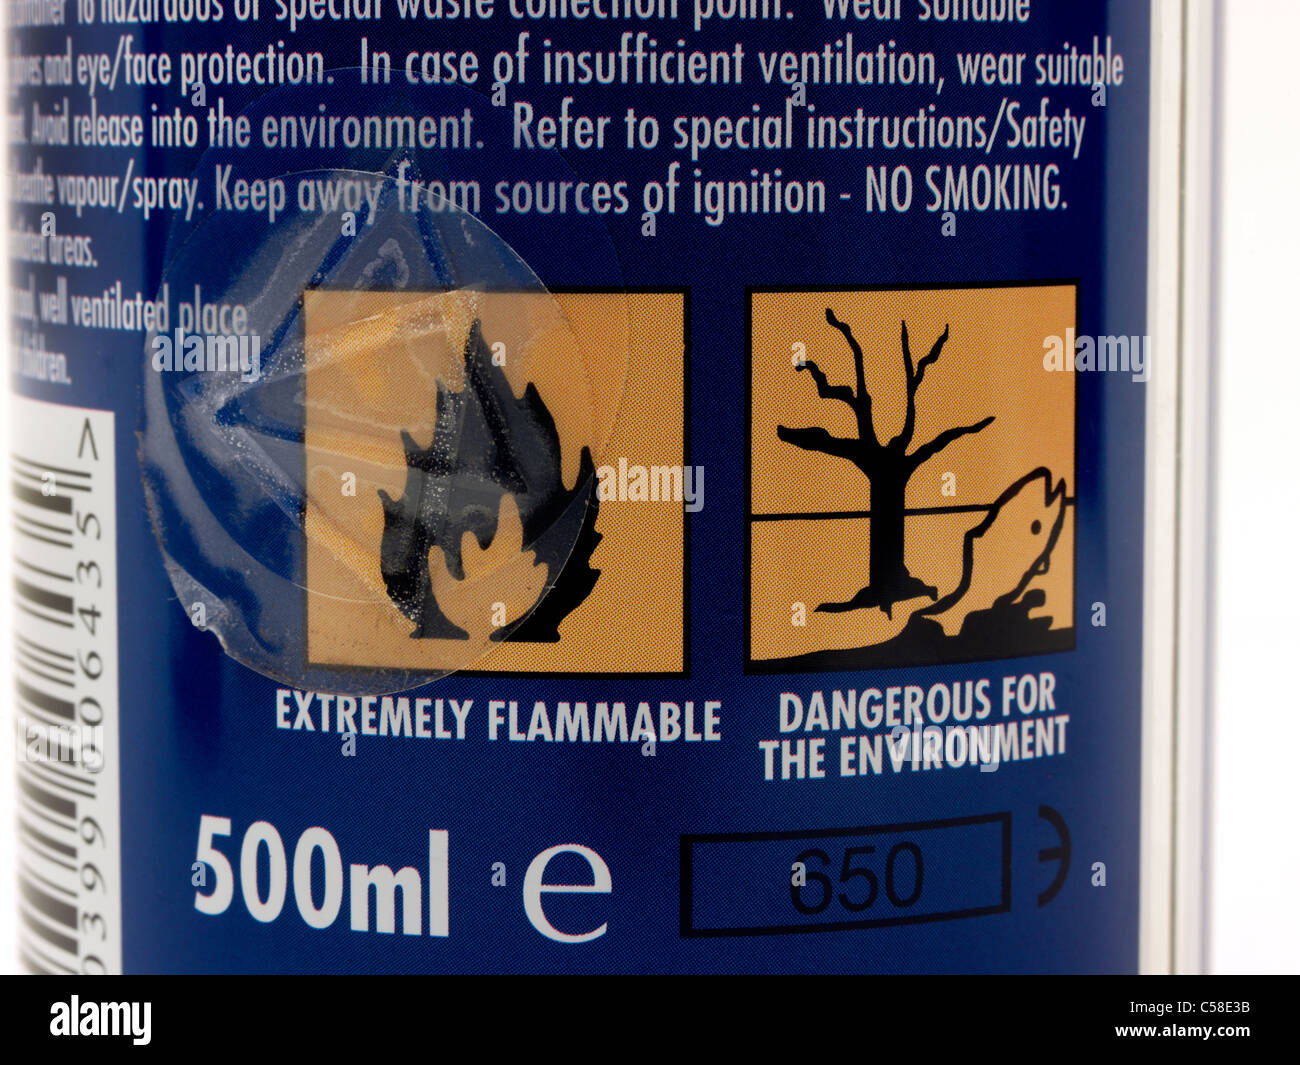 Highly Flammable And Dangerous To The Environment Warning Labels And A Security Tag On Glue Stock Photo